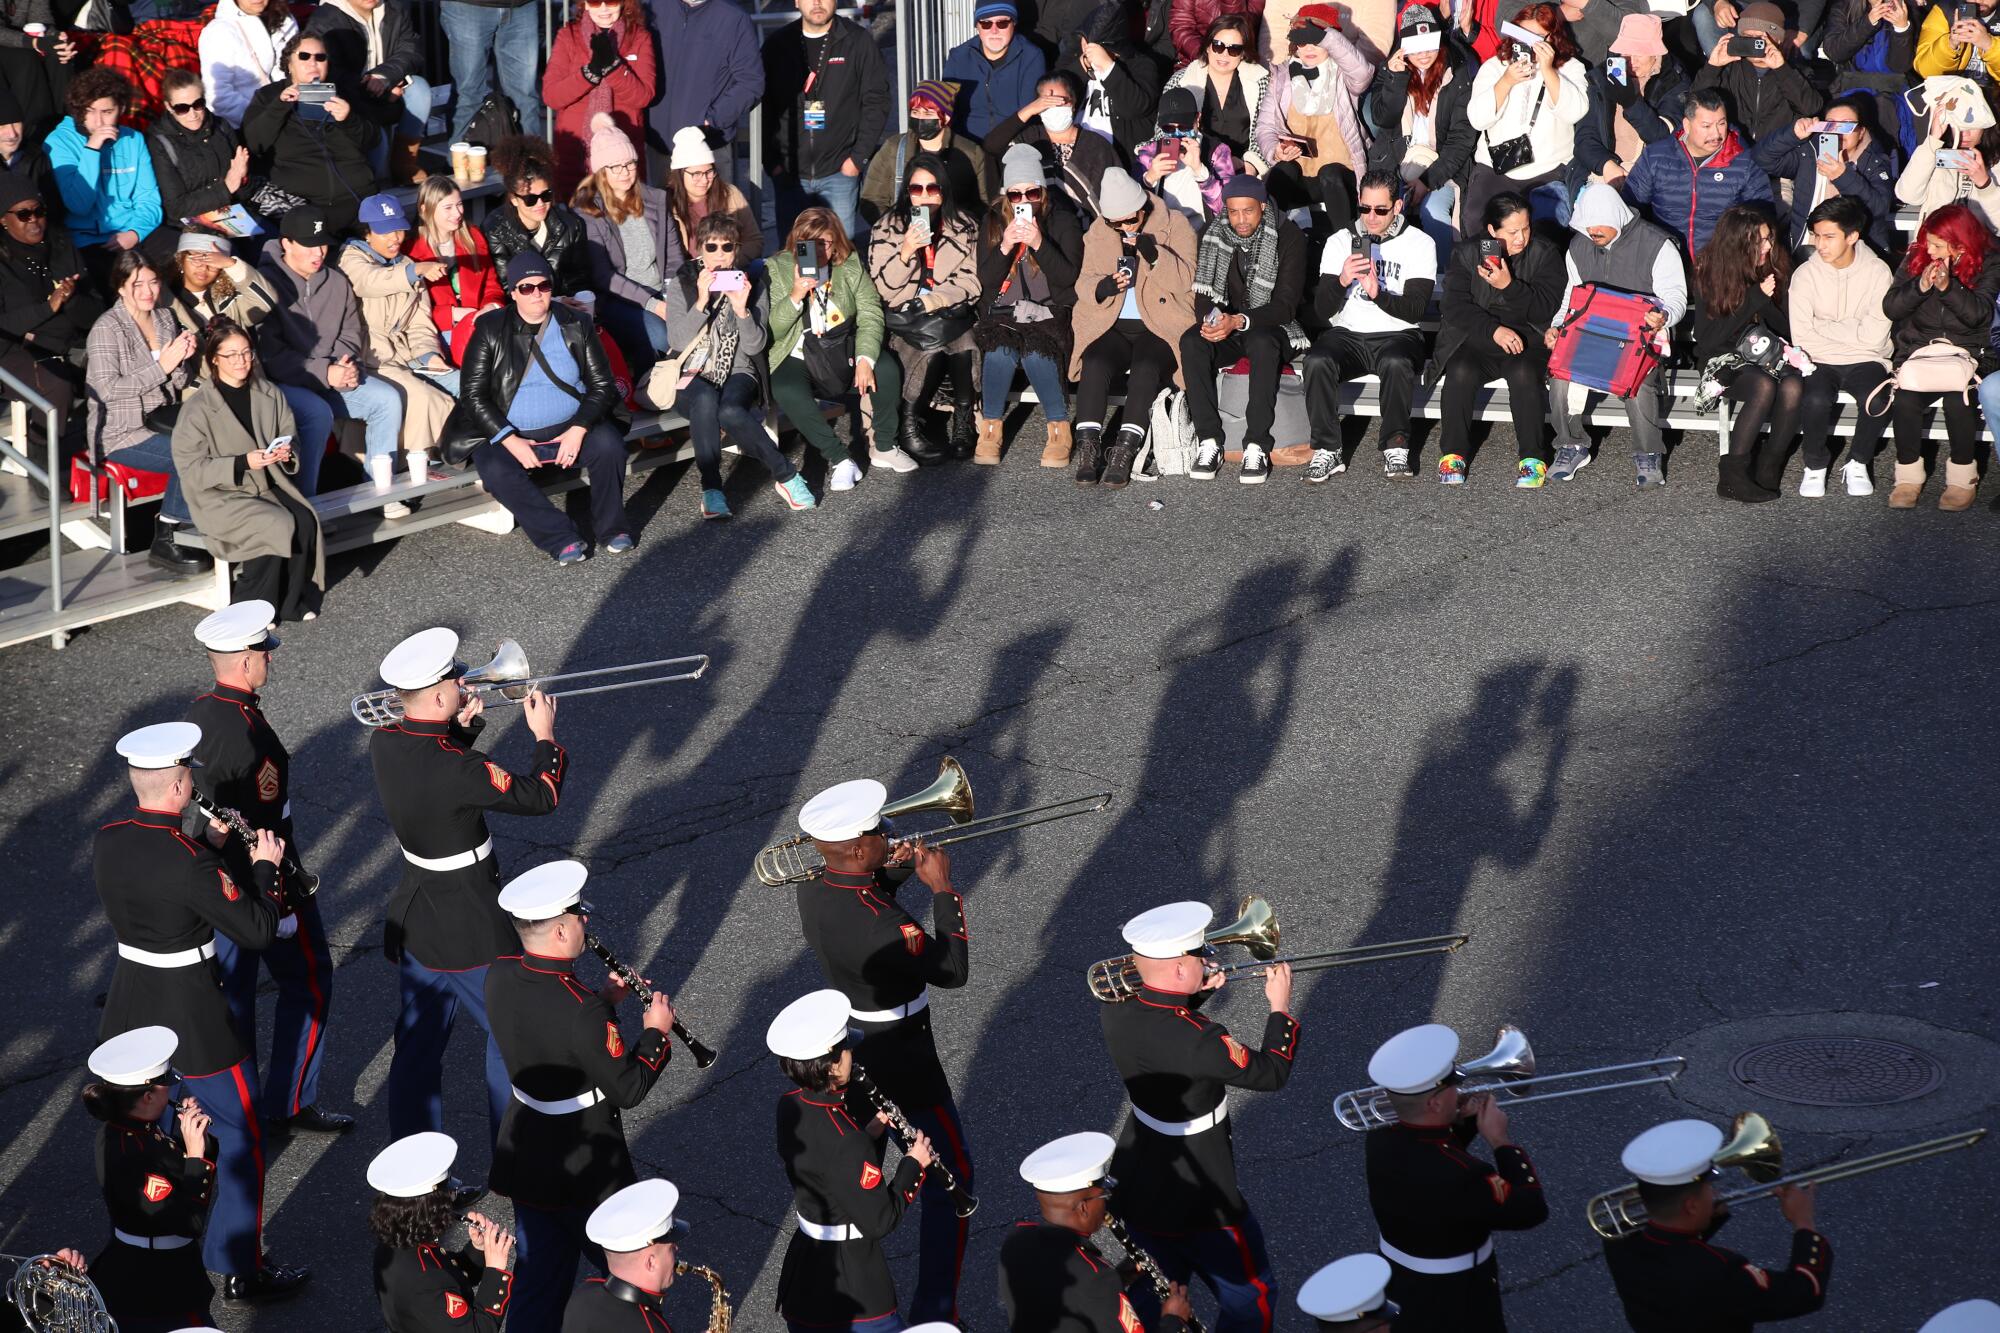 Marines in a marching band cast shadows on the Rose Parade route.